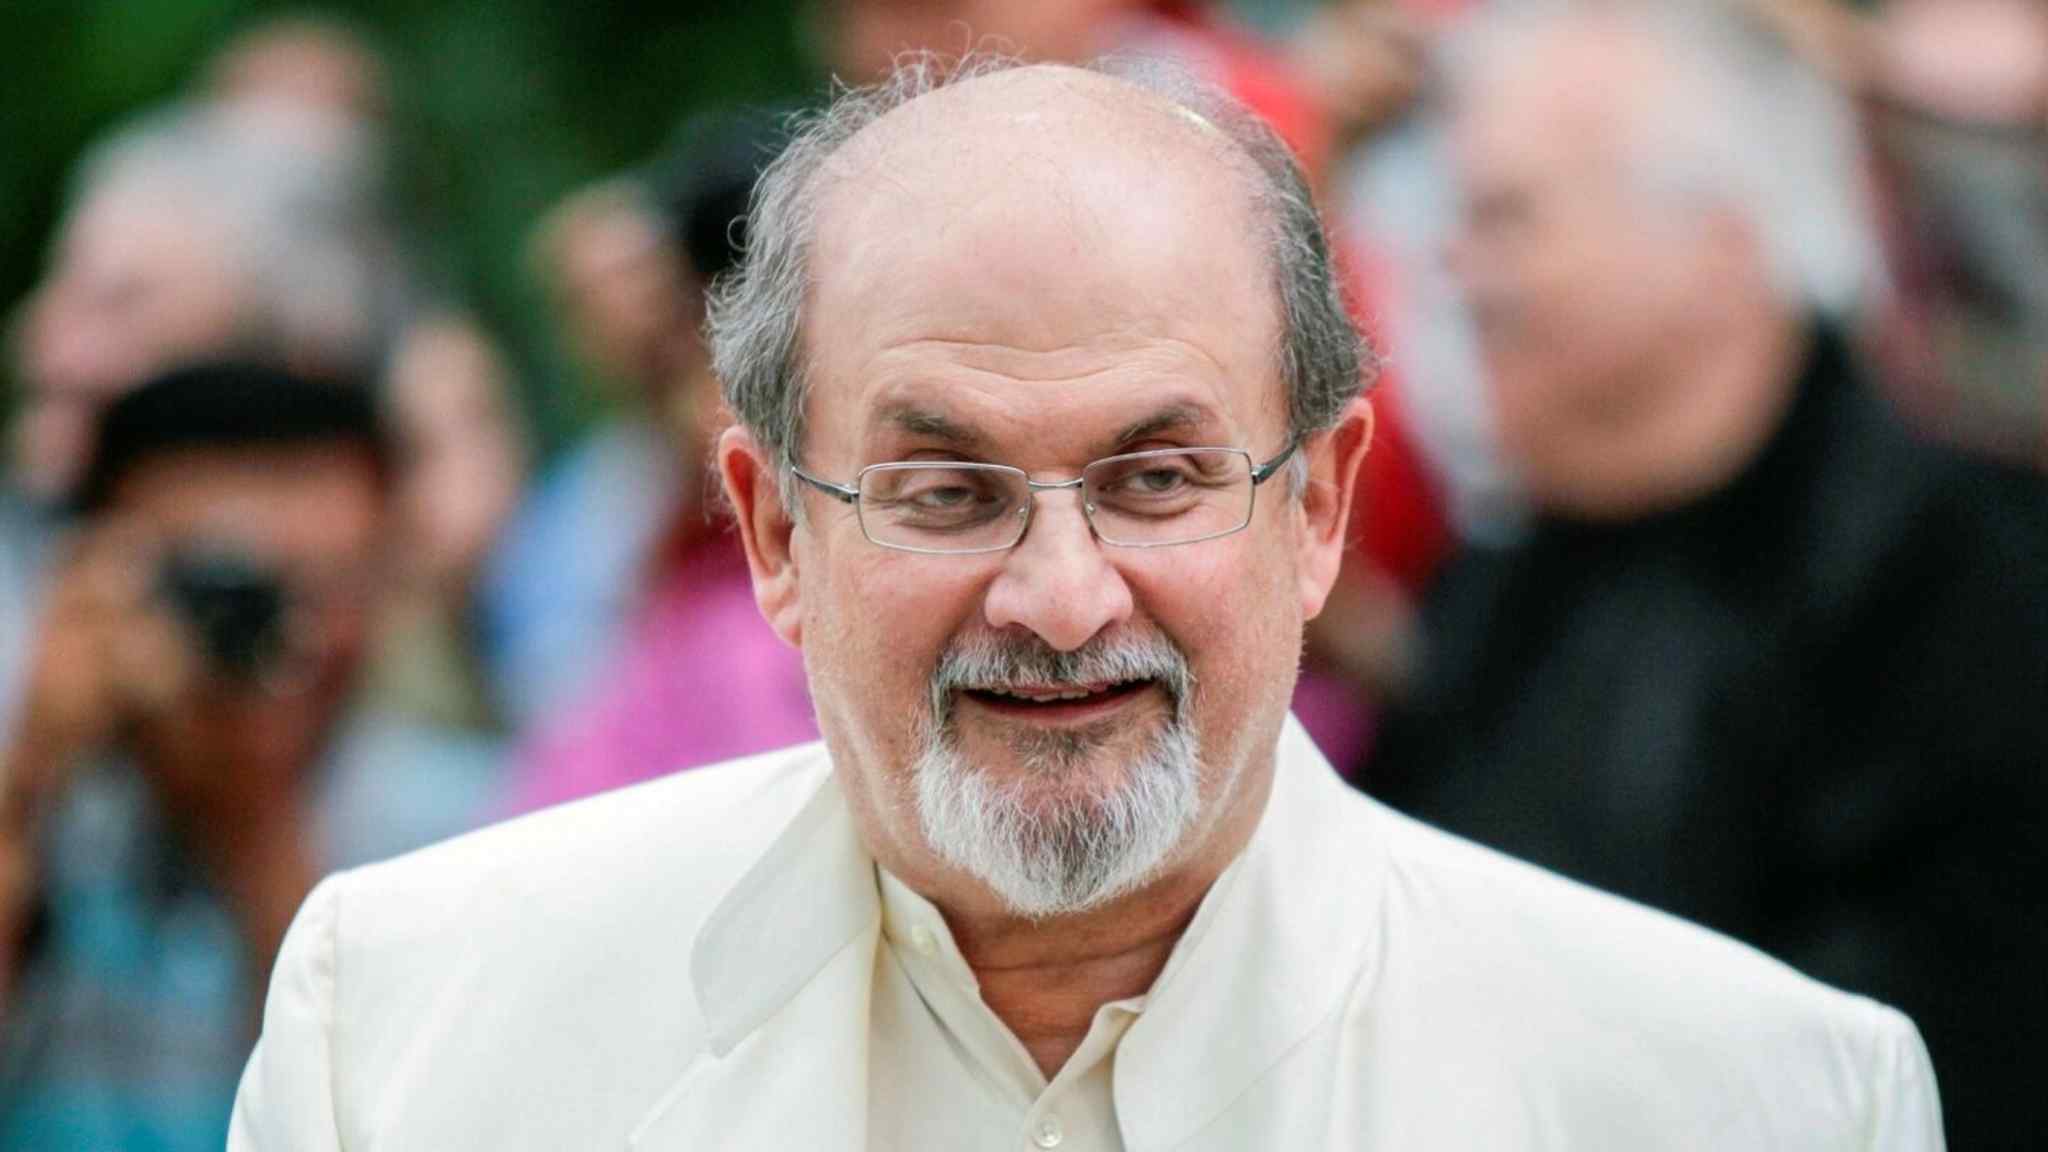 Suspect charged over stabbing of author Salman Rushdie